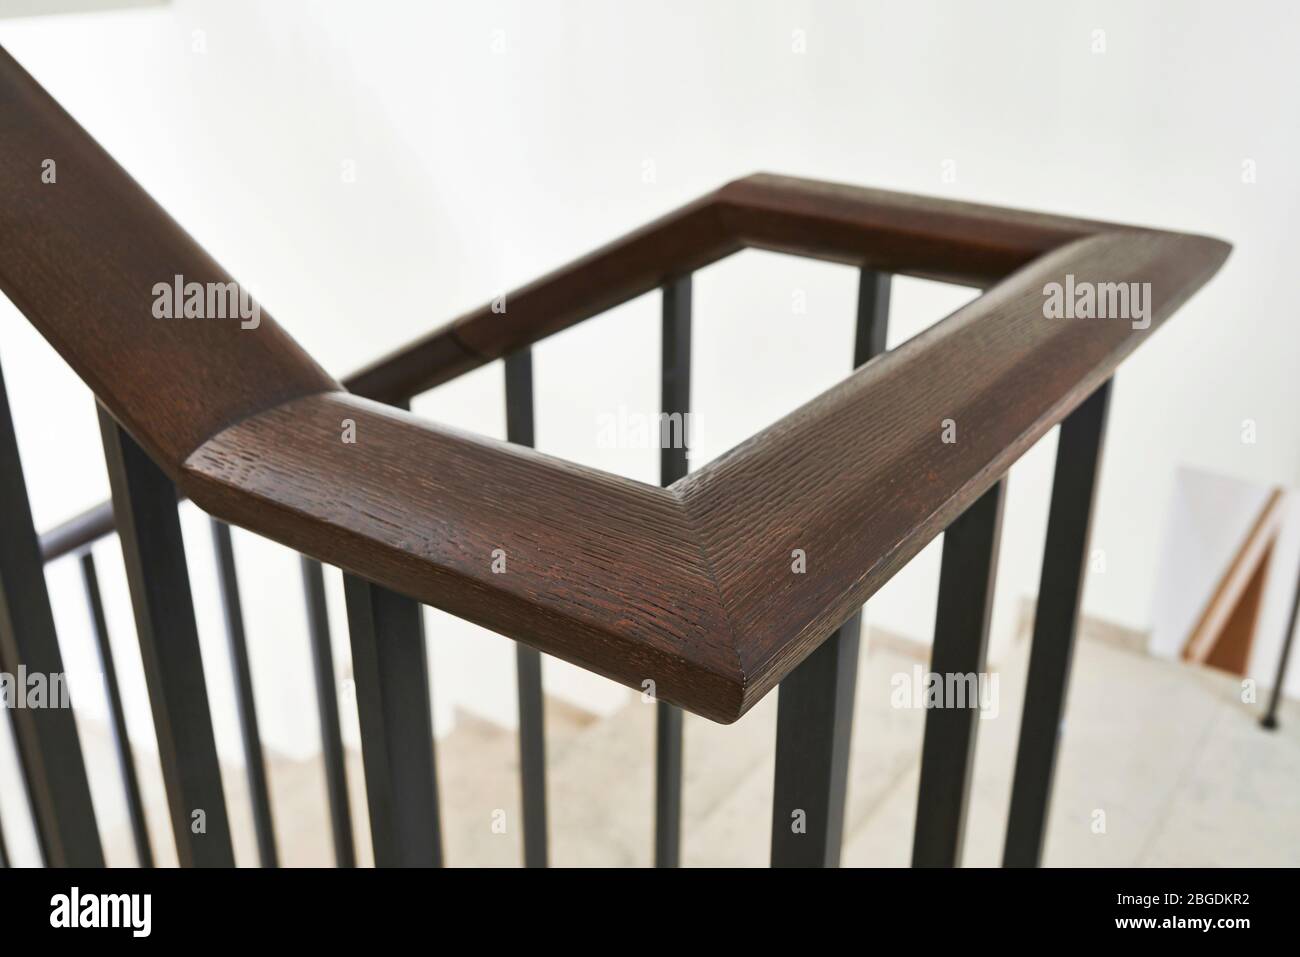 stairs in a private house; handrail; staircase Stock Photo